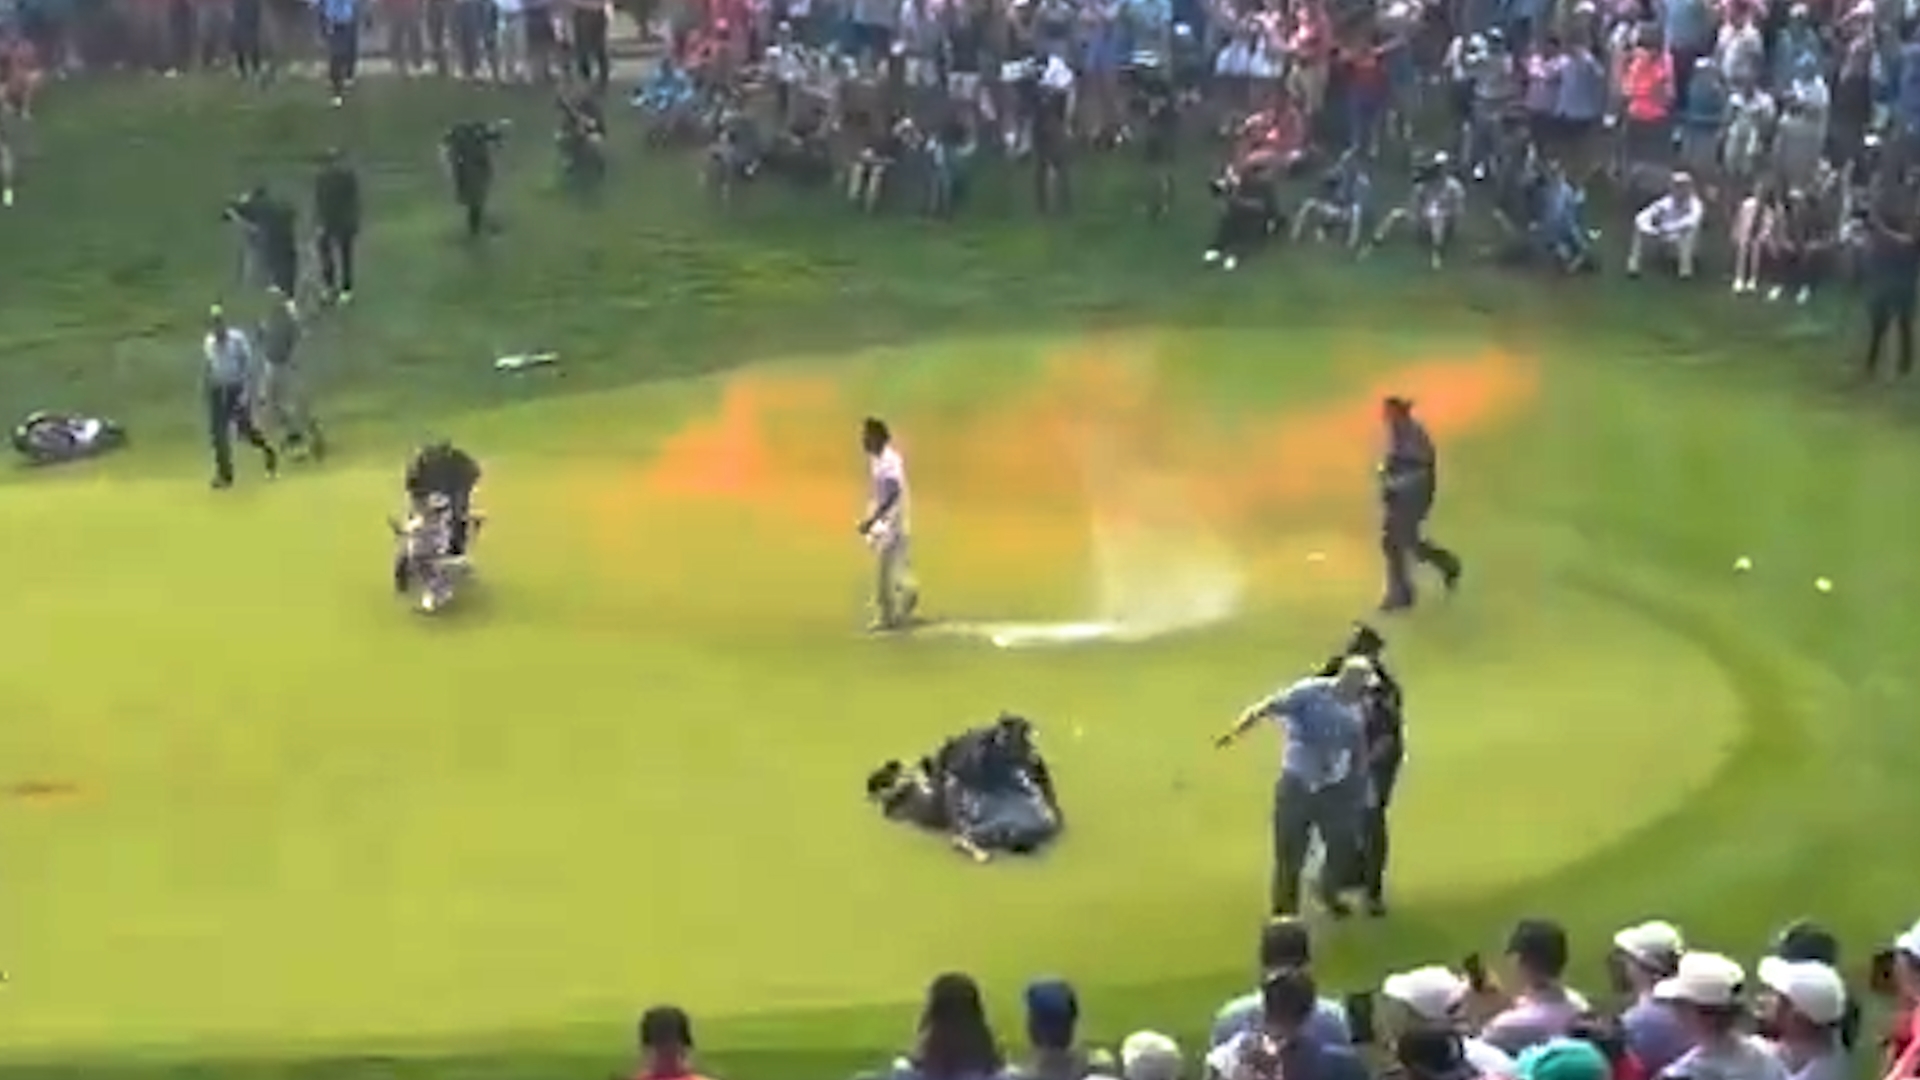 Six climate protesters stormed the 18th green while the leaders were lining up their putts for the final hole of regulation at the PGA Tour's Travelers Championship.